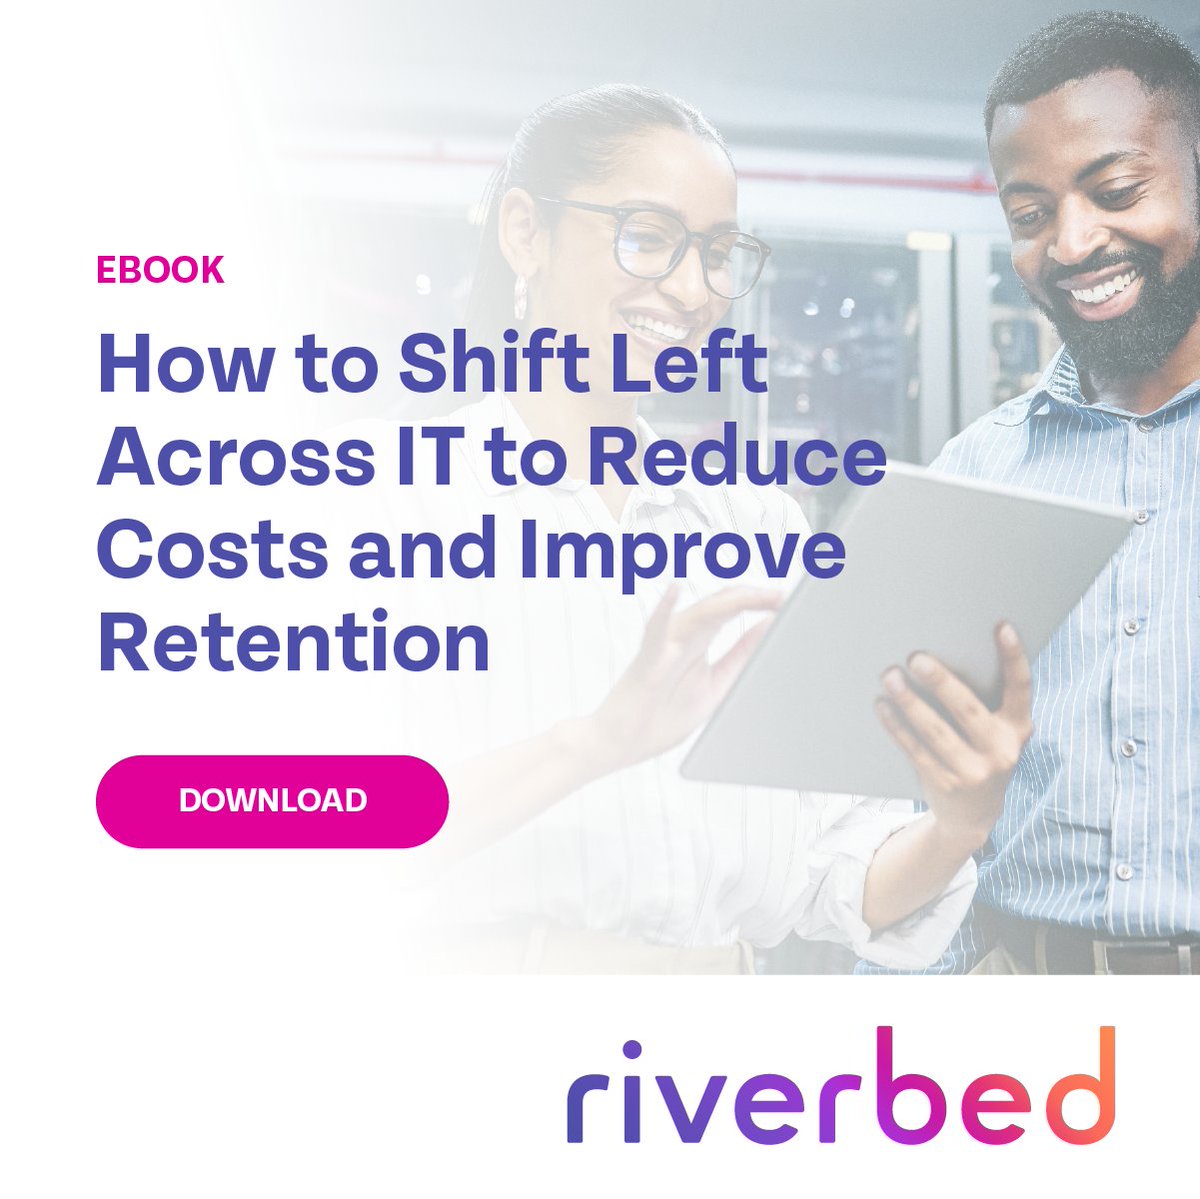 59% of IT professionals say they still manually troubleshoot issues to identify root causes. 🤯 This eBook explains how the Riverbed platform provides automated solutions to help IT teams #shiftleft. Download it here: rvbd.ly/49BOaDE